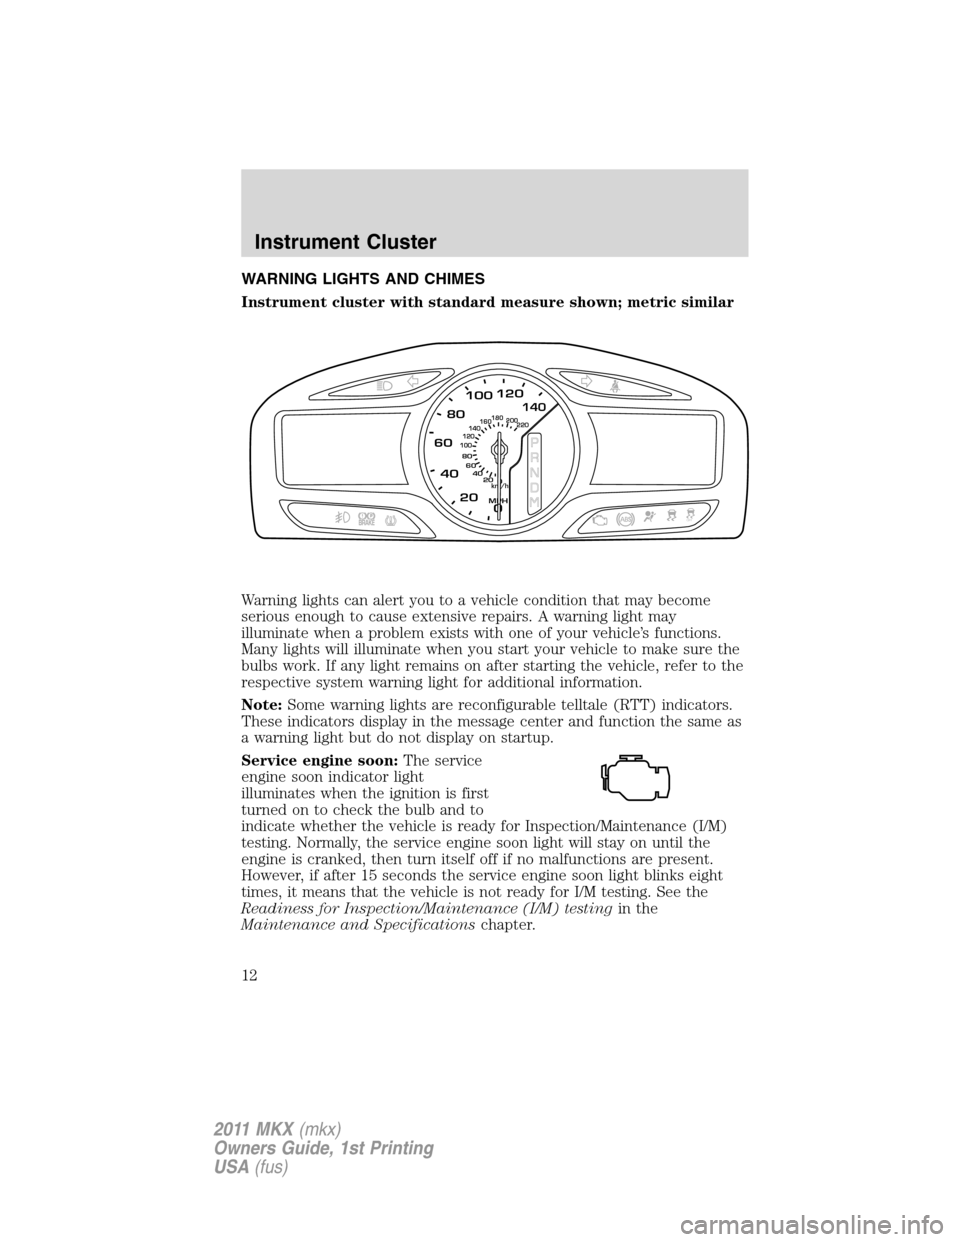 LINCOLN MKX 2011 User Guide WARNING LIGHTS AND CHIMES
Instrument cluster with standard measure shown; metric similar
Warning lights can alert you to a vehicle condition that may become
serious enough to cause extensive repairs. 